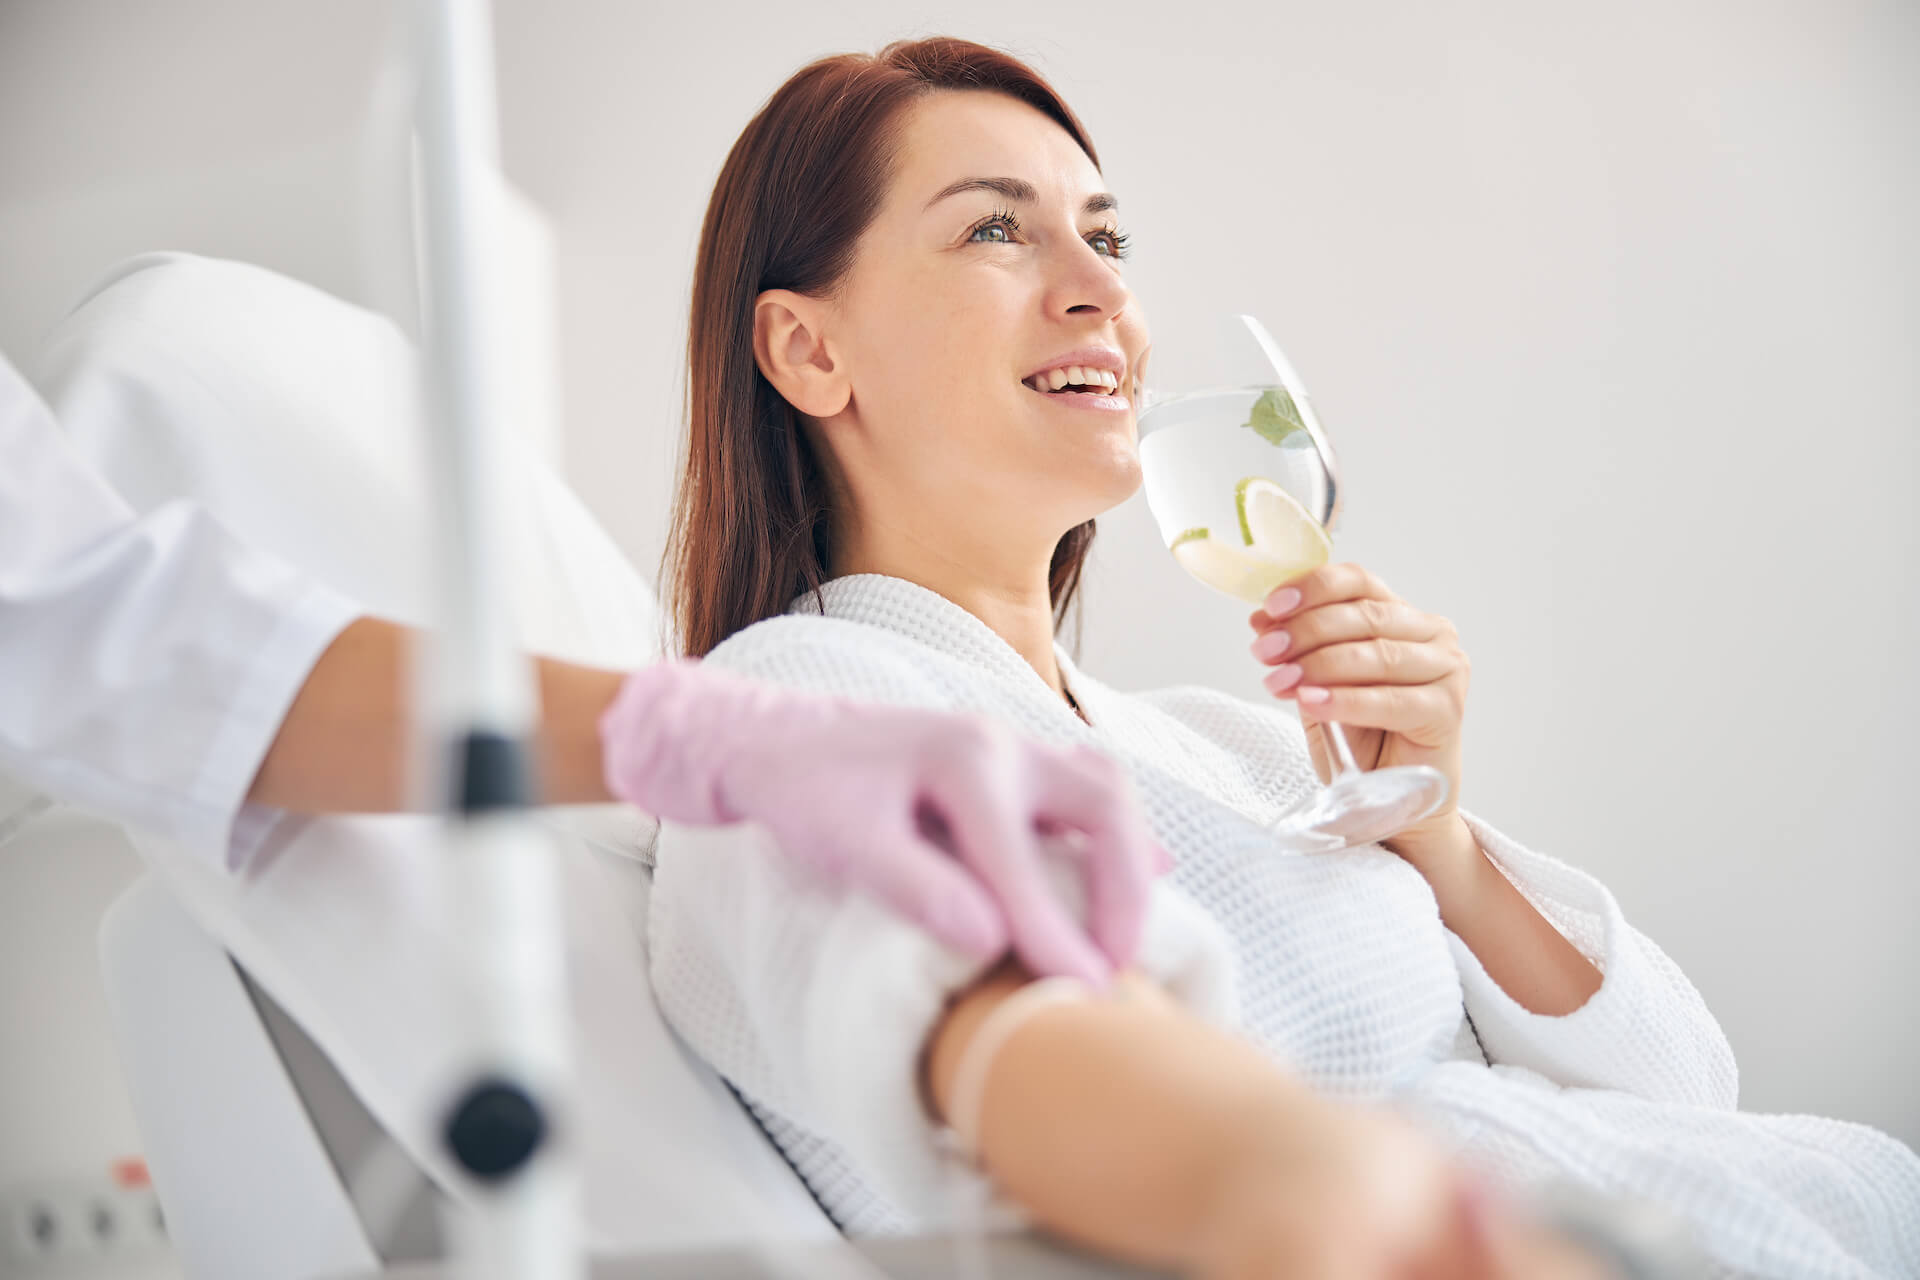 De-stress With IV Therapy or HBOT